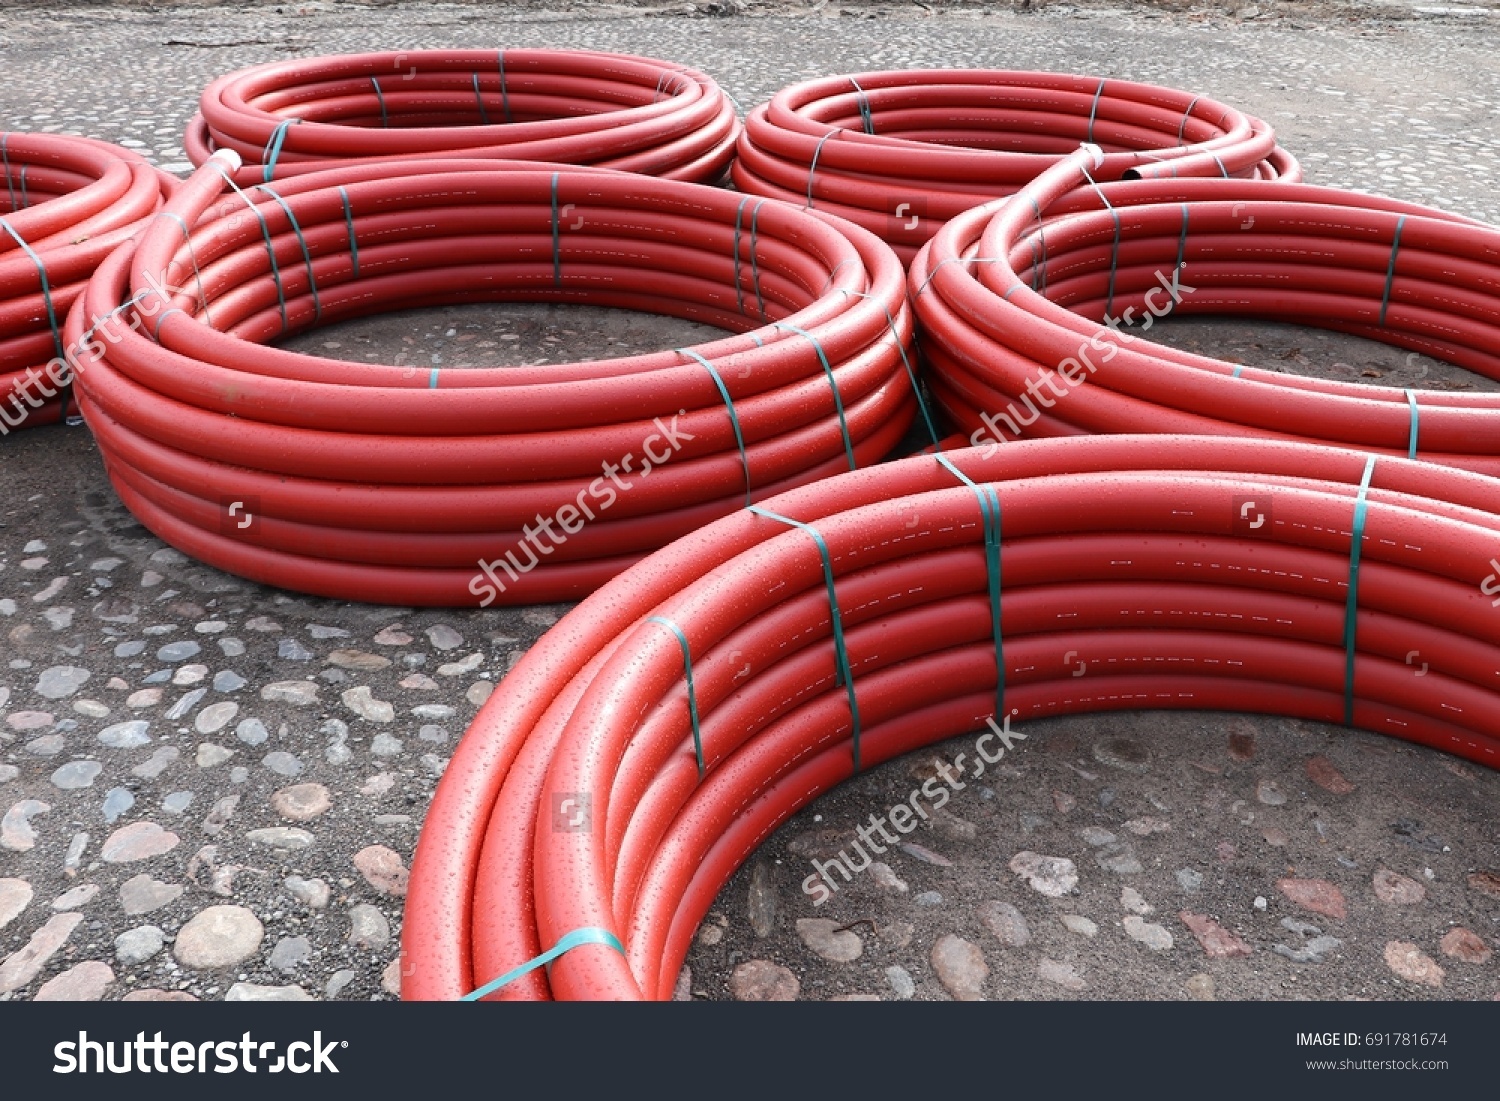 Cable conduit for trench less installations, Cable Protection #691781674